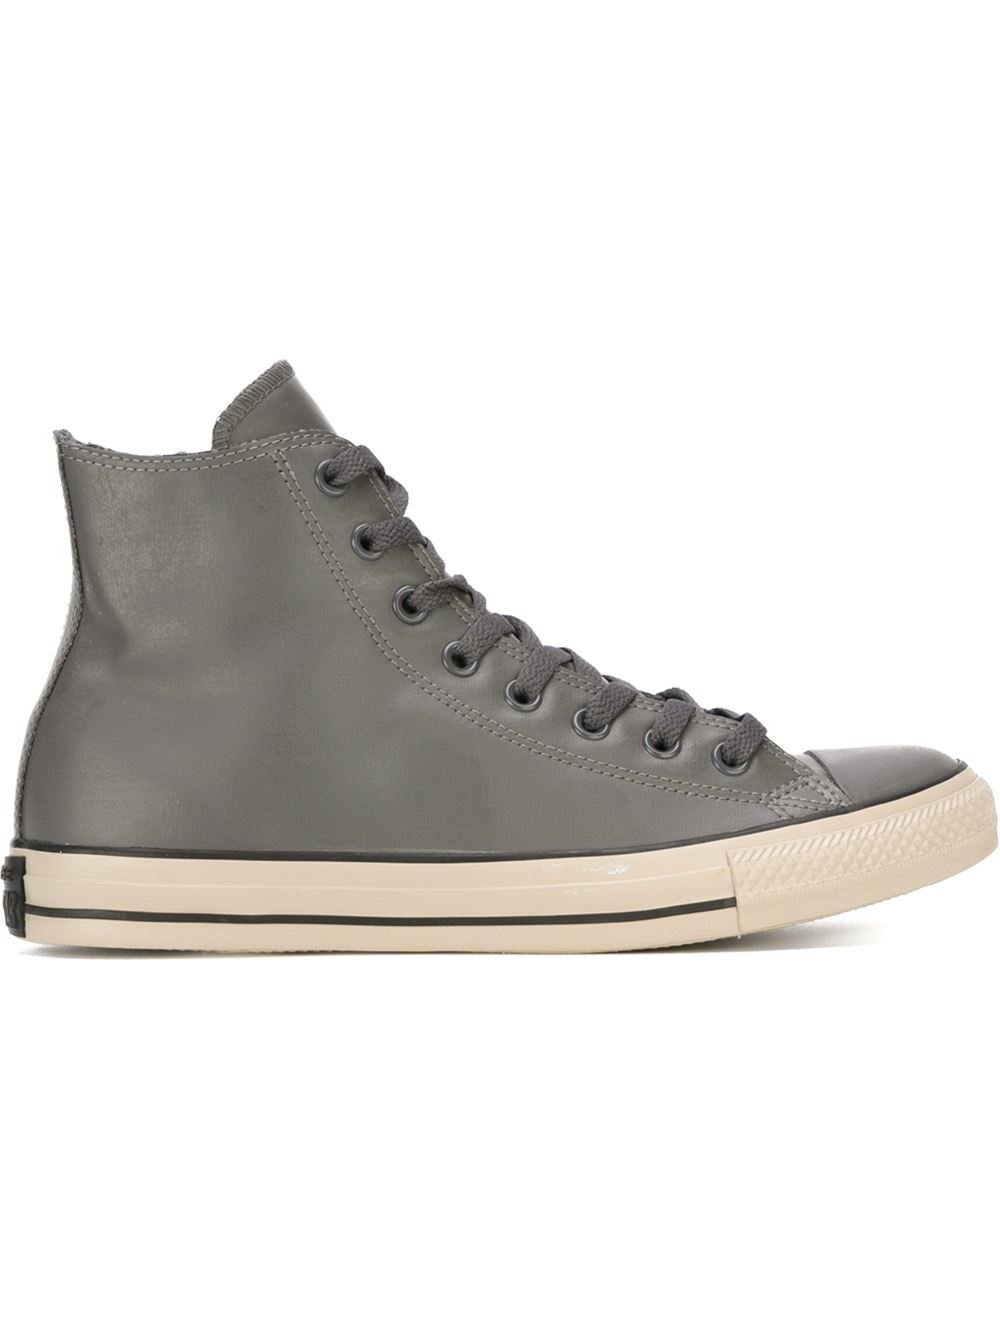 Converse All Star High-Top Sneakers in Gray (grey) | Lyst